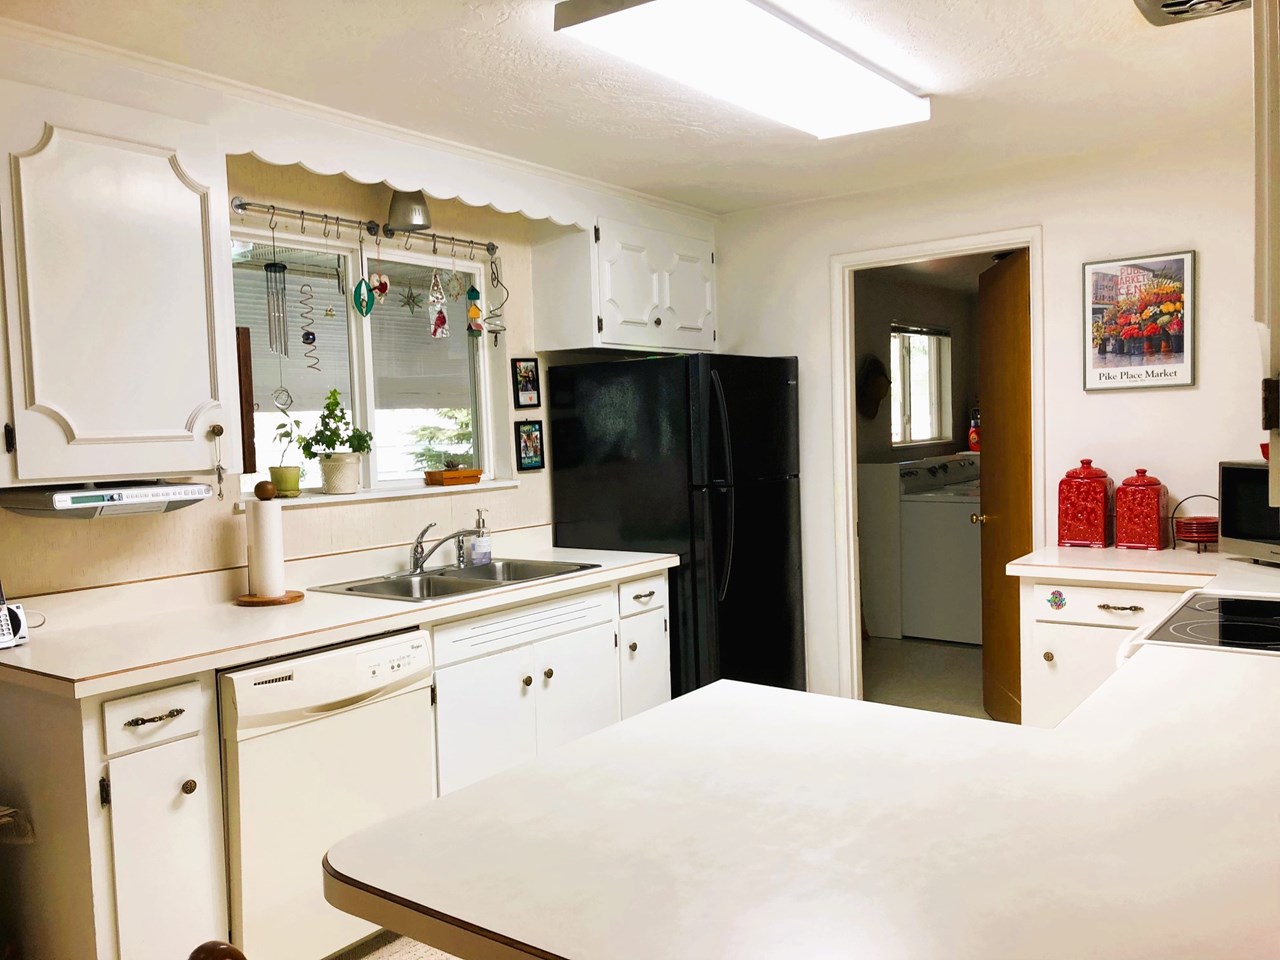 kitchen area leads to laundry room